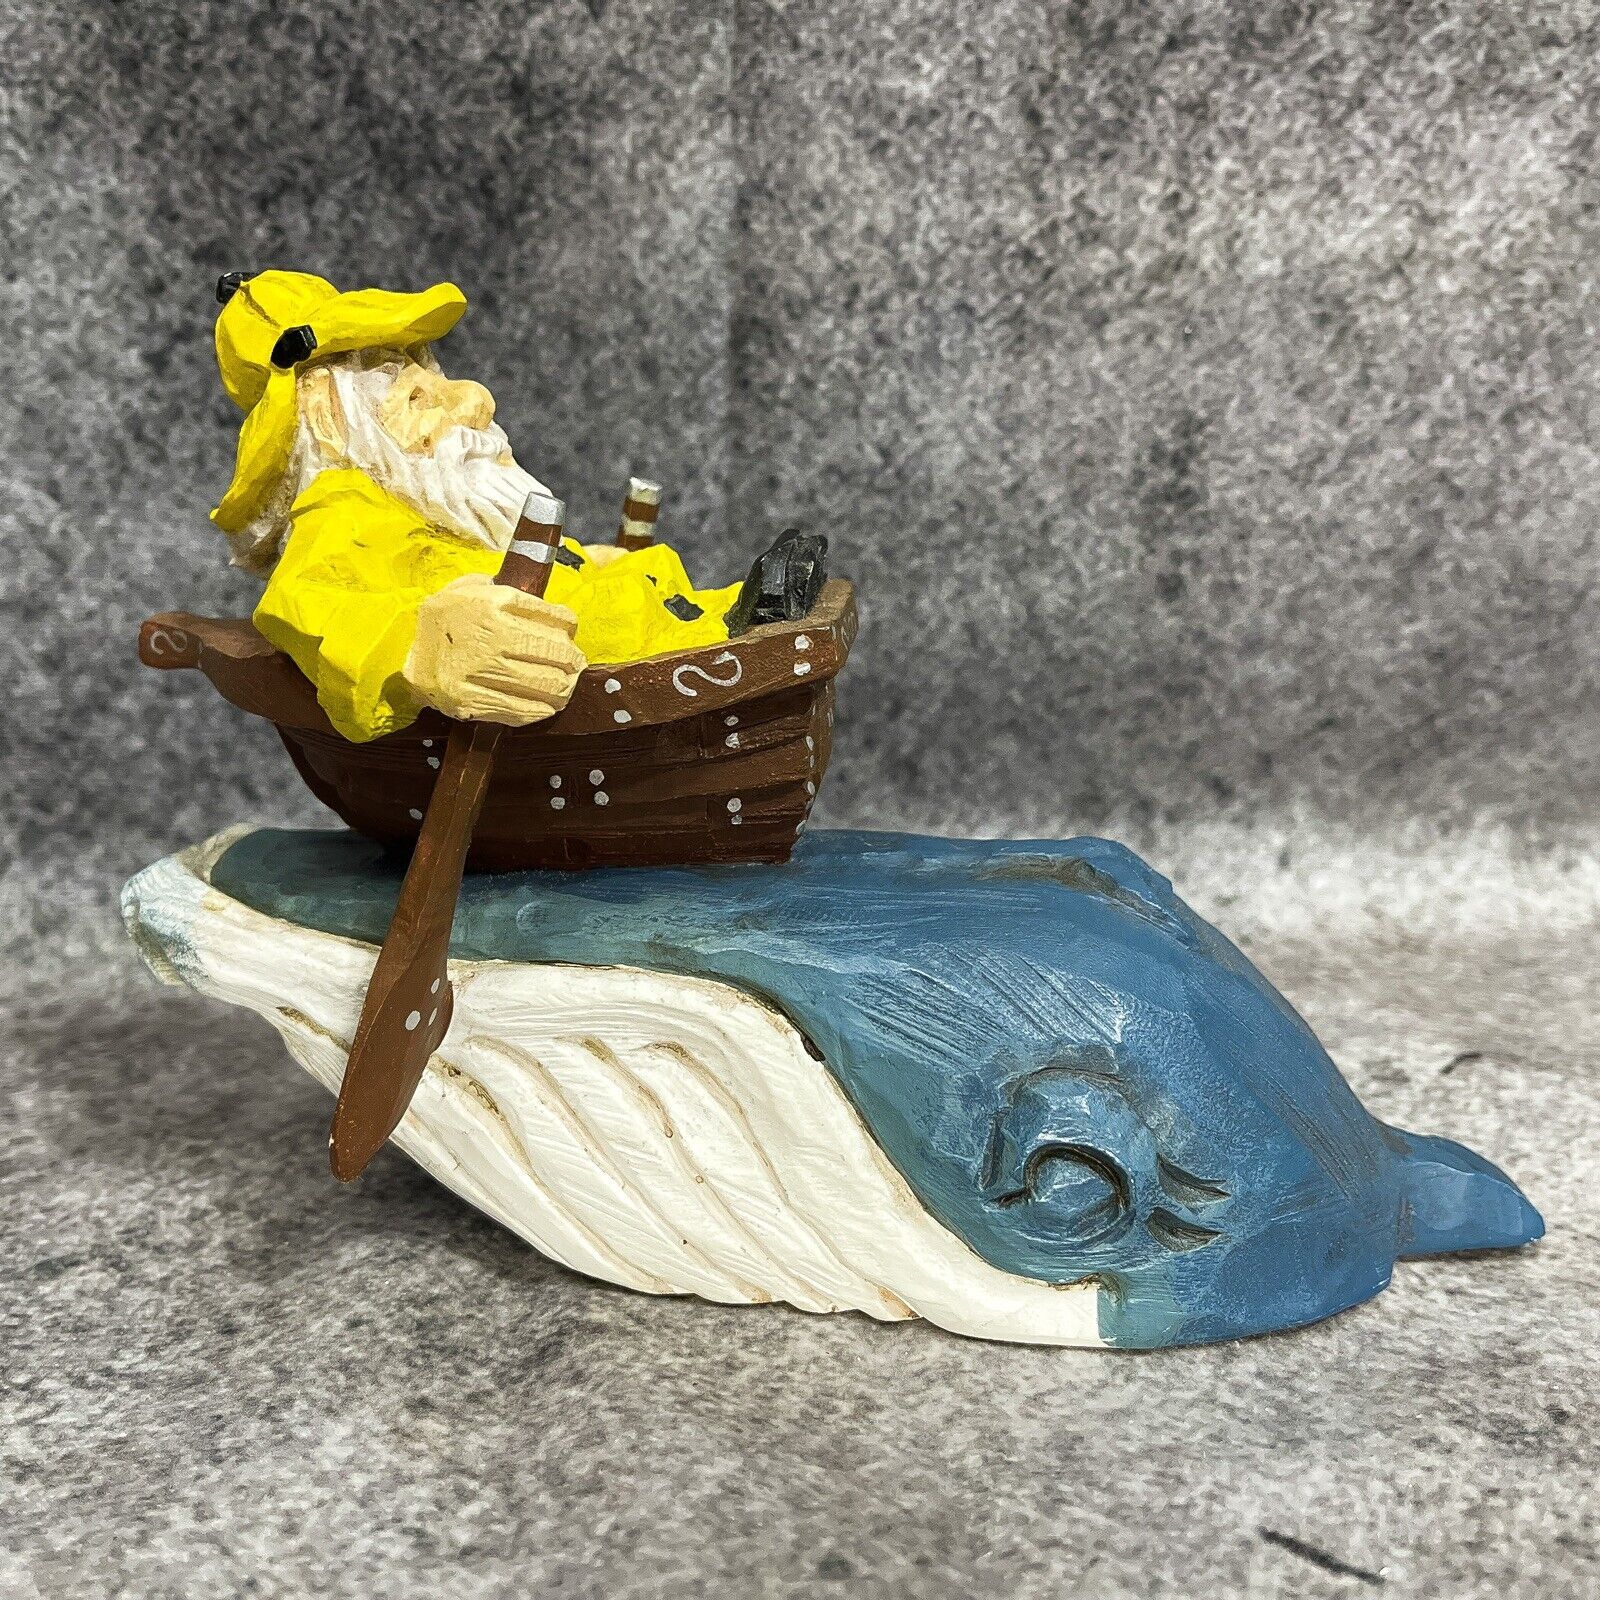 1996 David Frykman Lighthouse Keeper On Whale Nautical Boat Sculpture Figurine